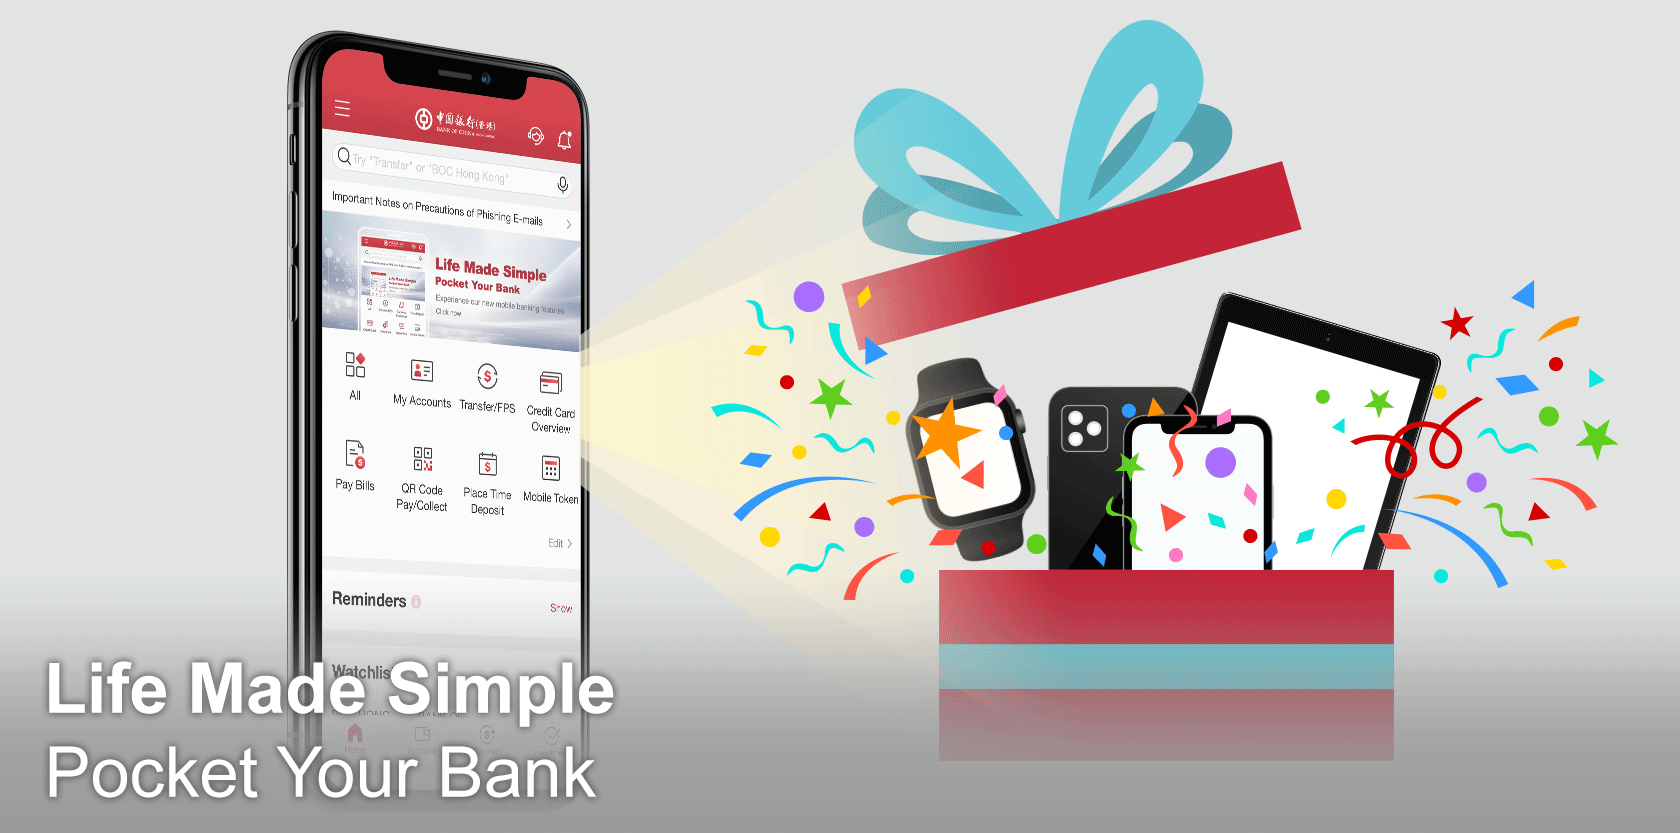 Life Made Simple Pocket Your Bank
Handle all financial needs on the spot via BOCHK Mobile Banking